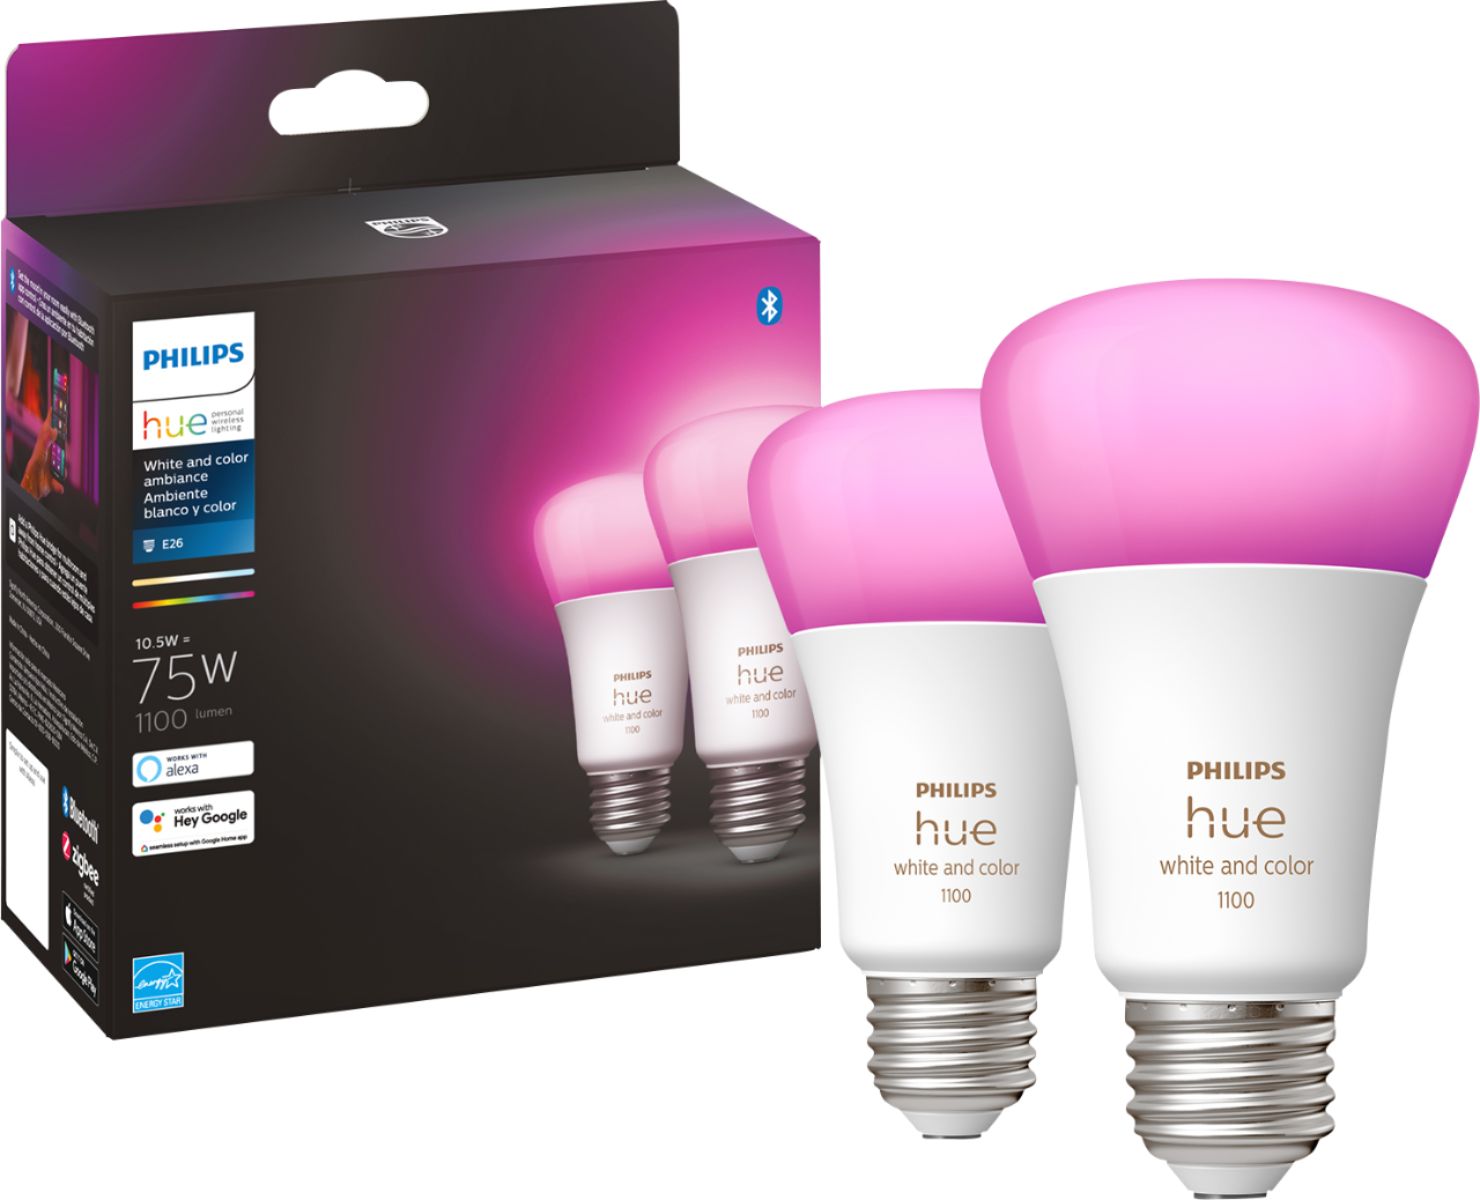 Leap Fade out cheese Philips Hue White and Color Ambiance A19 Bluetooth 75W Smart LED Bulbs  (2-pack) 563361 - Best Buy